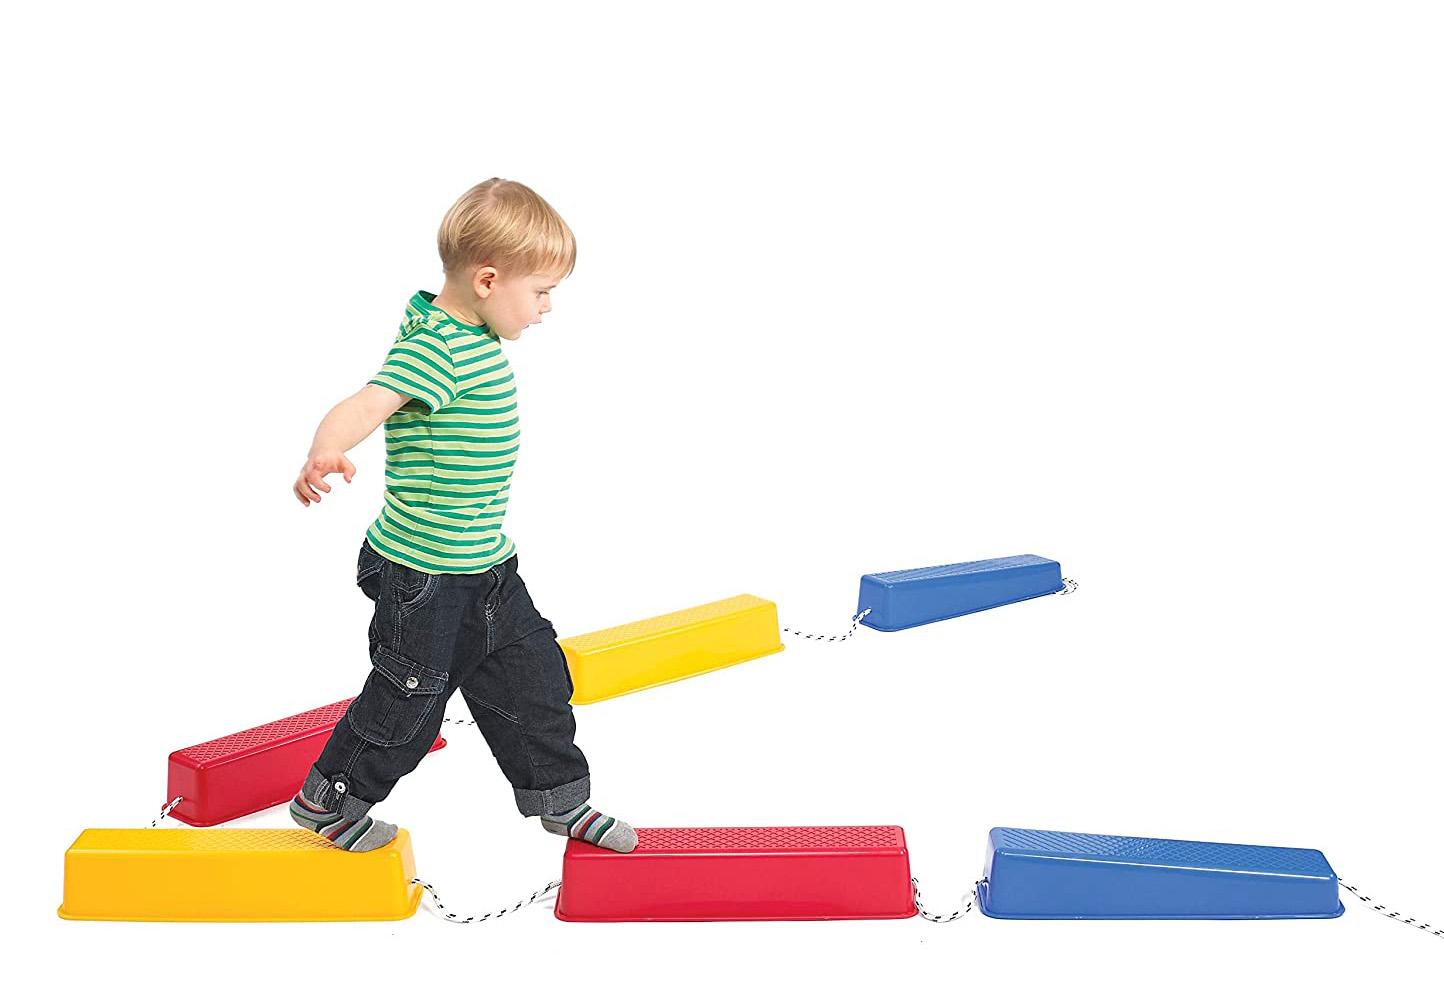 Edx Education Step-a-Logs Indoor & Outdoor Balance Play Set for $37.12 Shipped